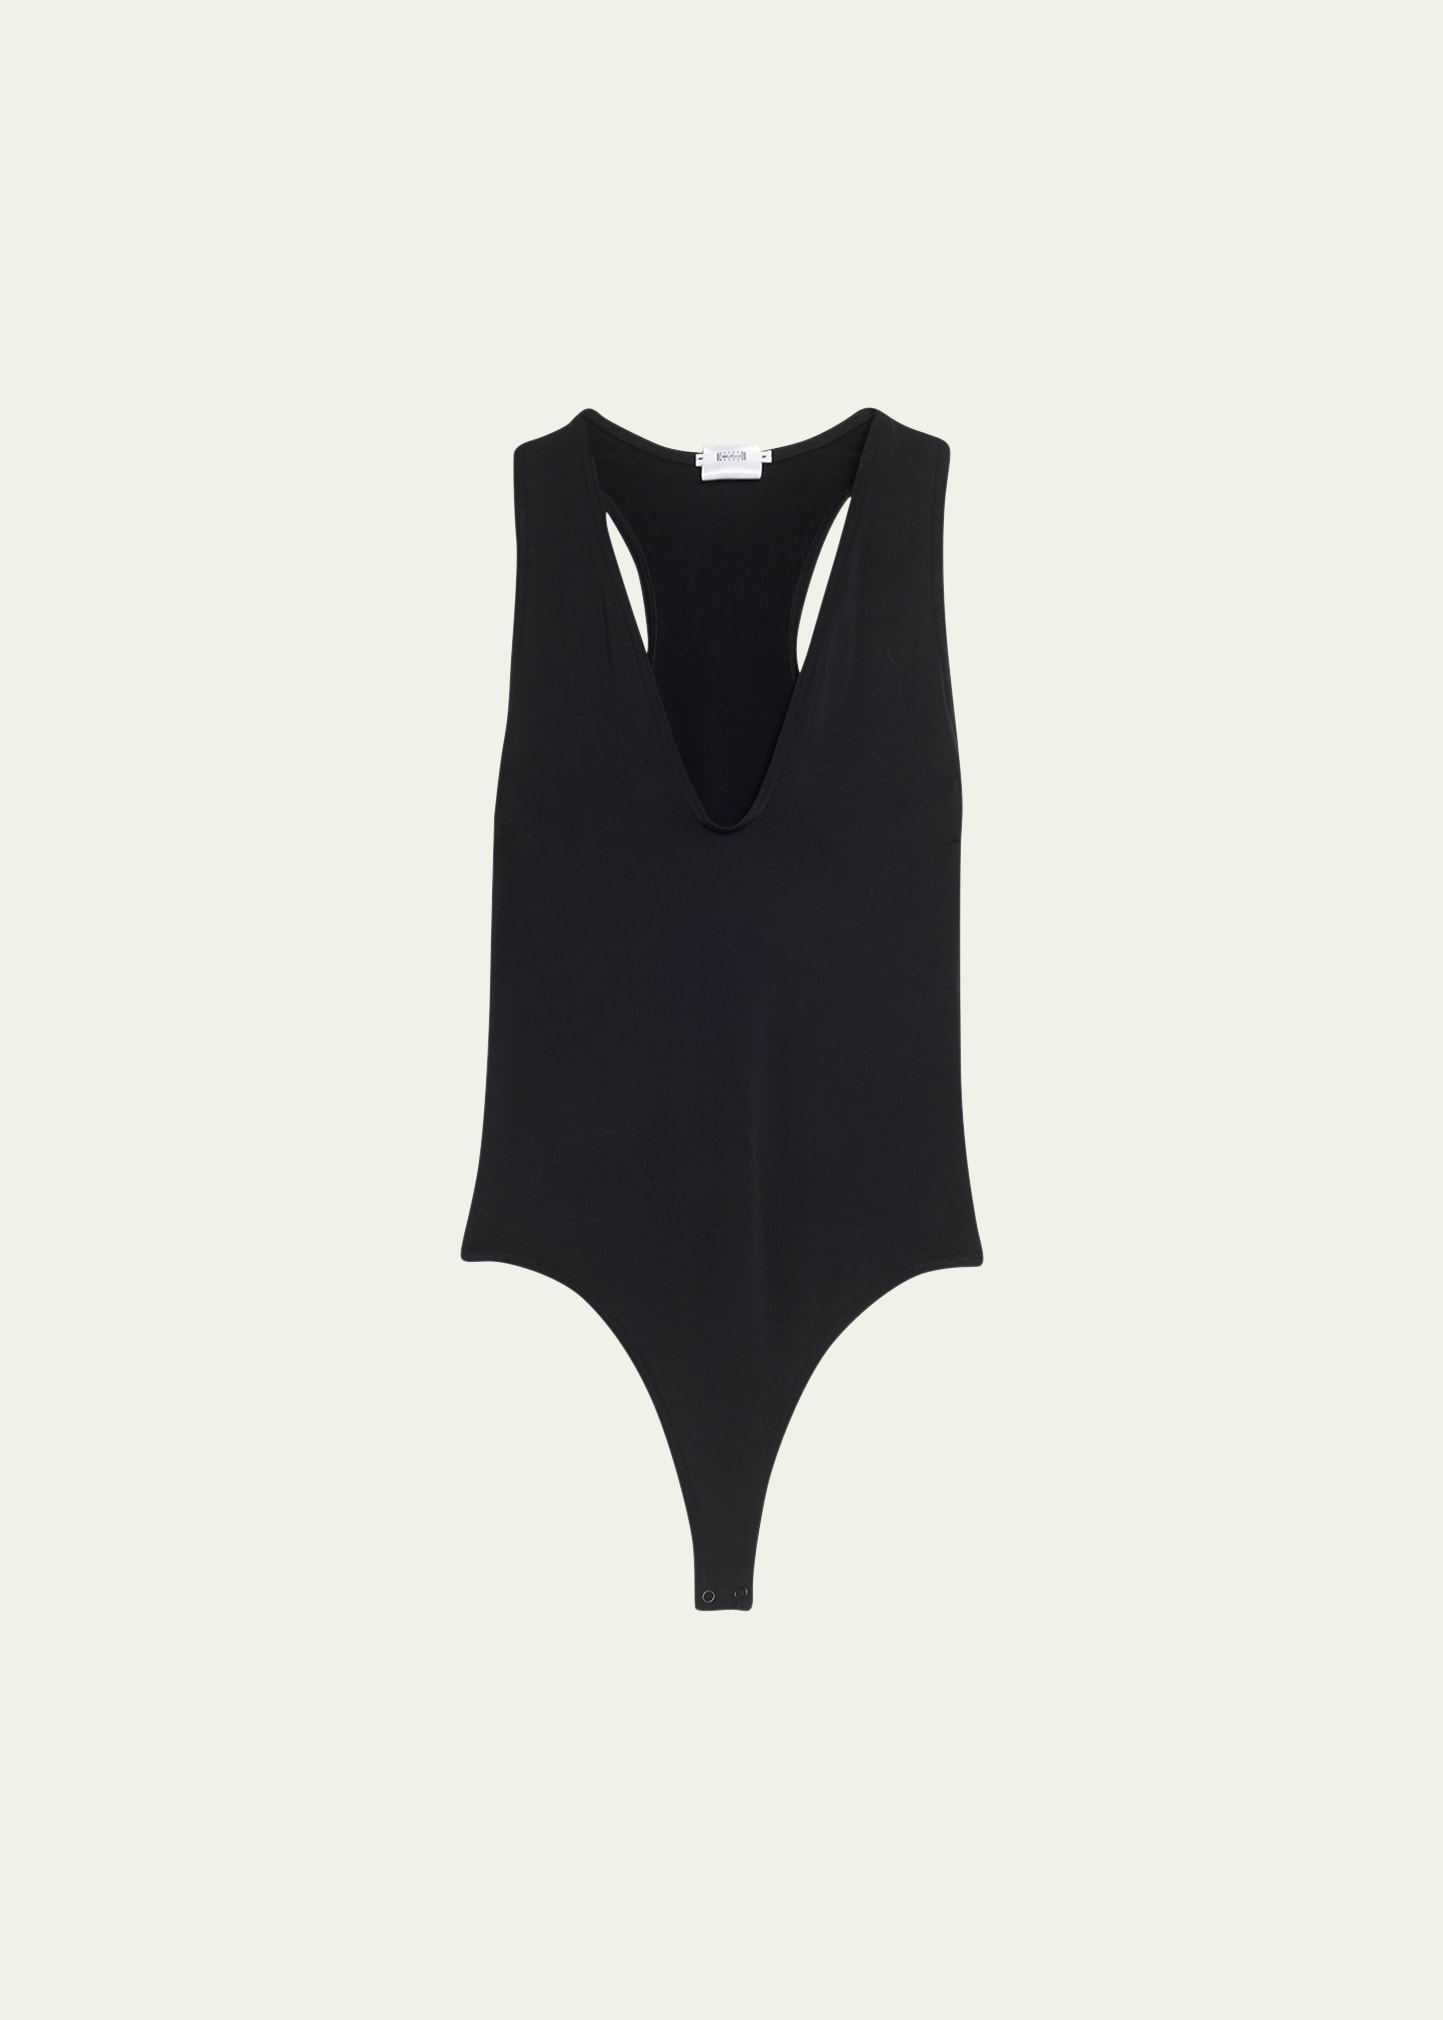 WOLFORD BUENOS AIRES SLEEVELESS STRING BODYSUIT